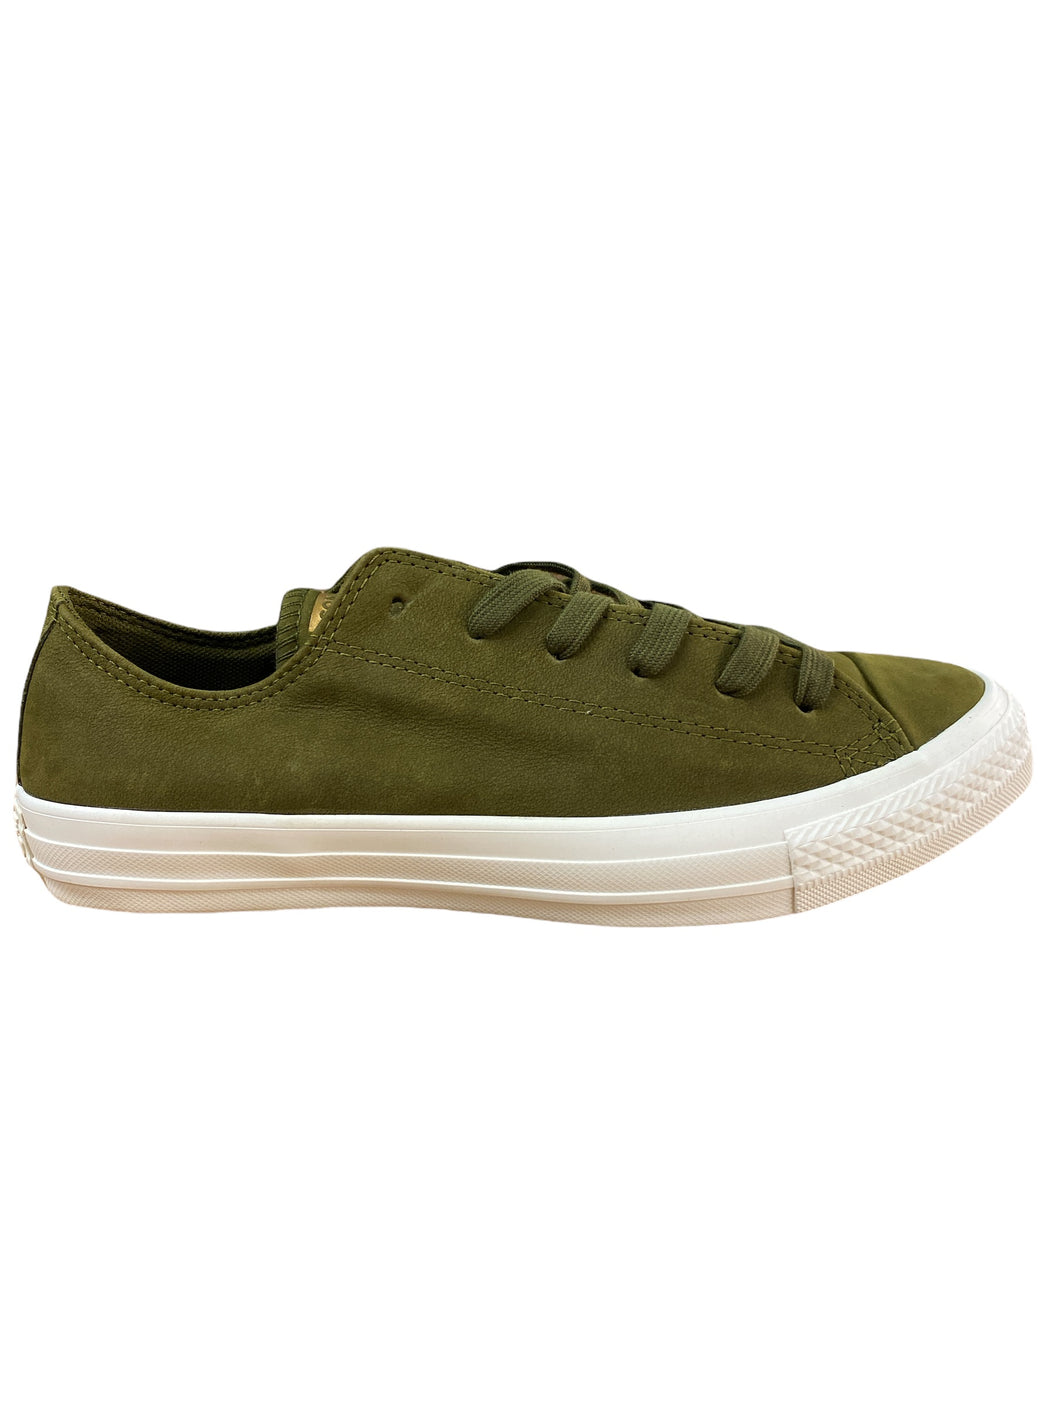 Converse Chuck Taylor All Star OX Unisex Olive Leather Low Sneakers 5 M / 7 W